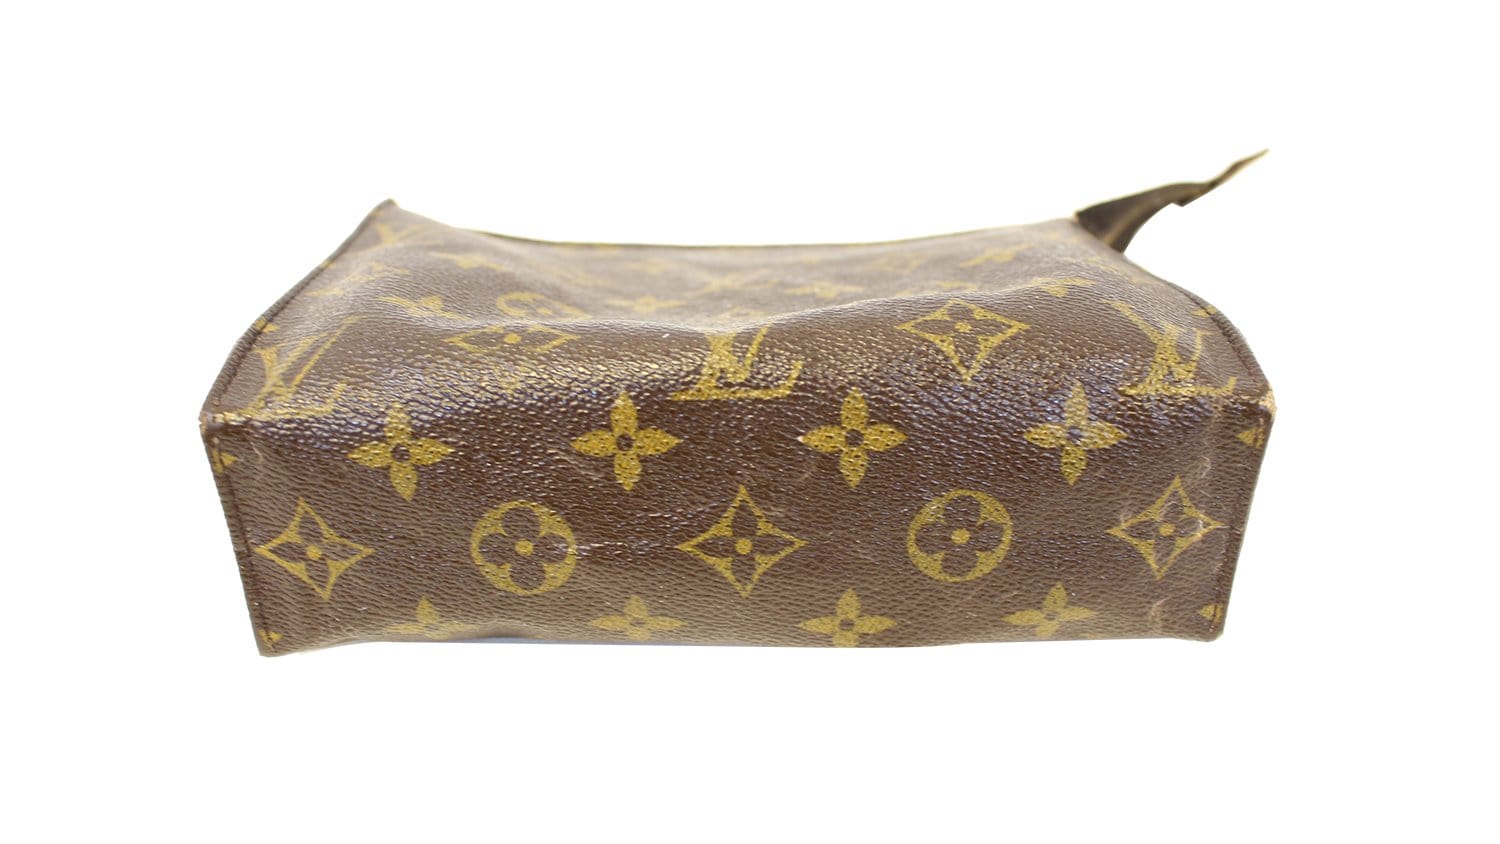 Louis Vuitton Toiletry Pouch 19 Monogram Canvas – Coco Approved Studio